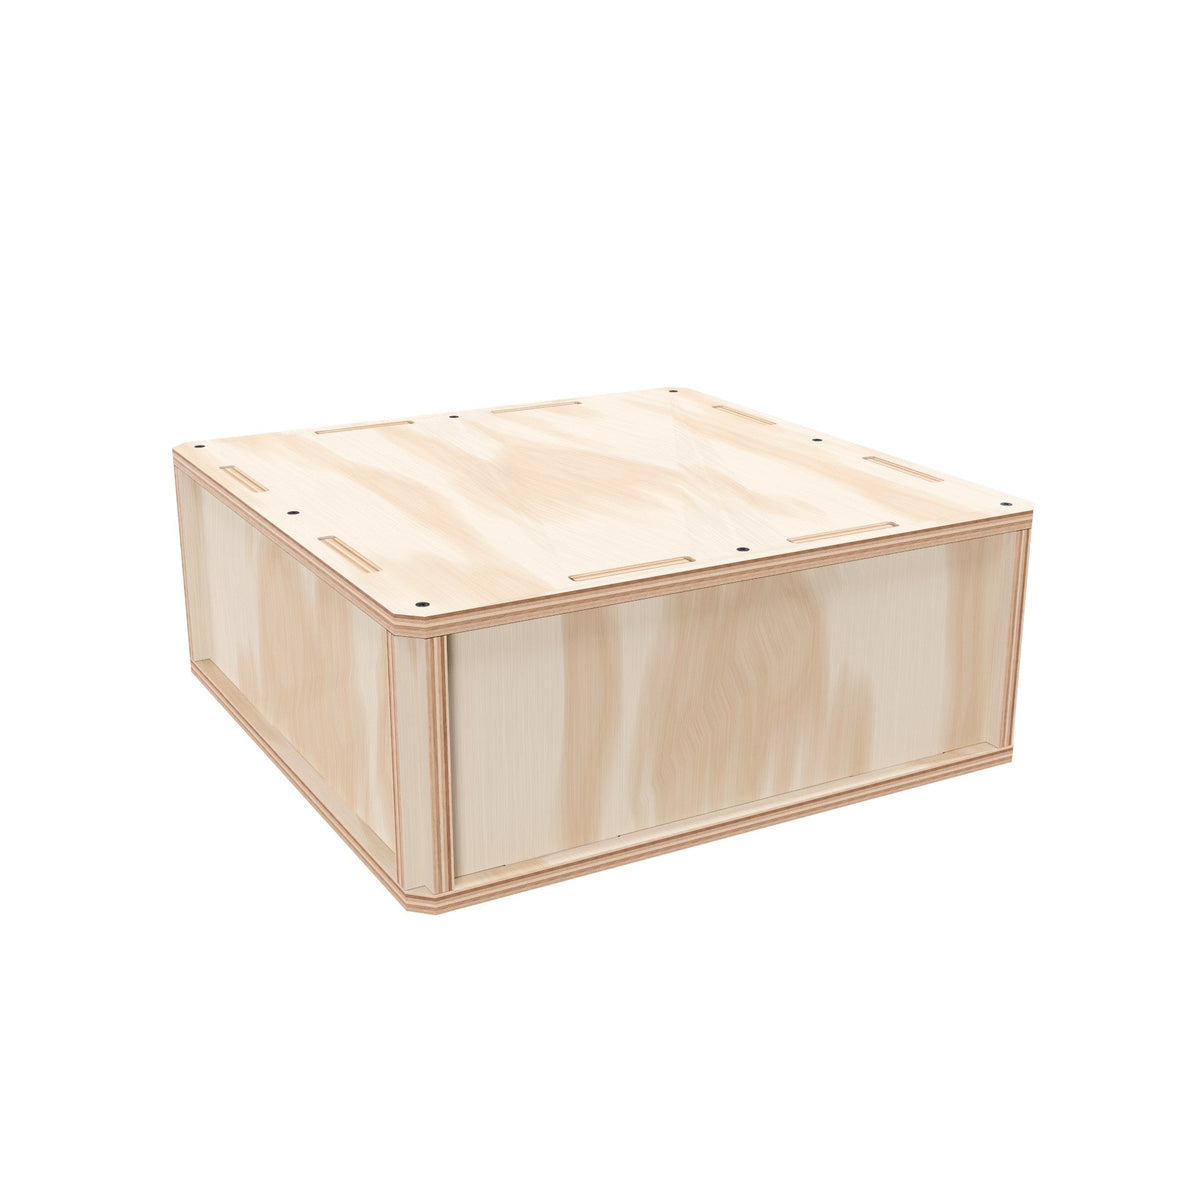 Plywood Shipping Crate 16x16x7